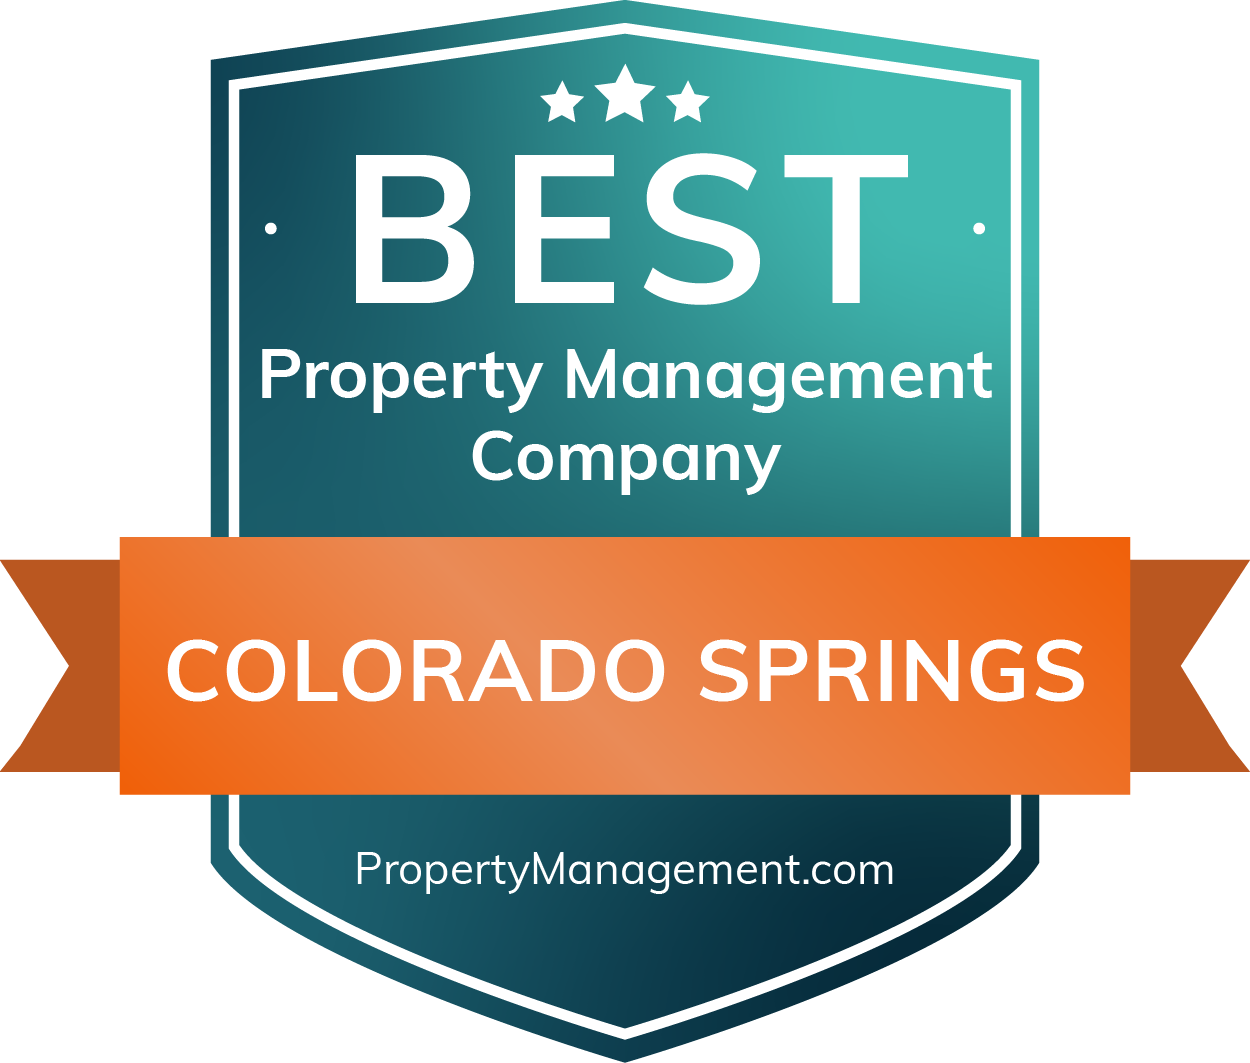 The Best Property Management Companies in Colorado Springs, Colorado of 2022